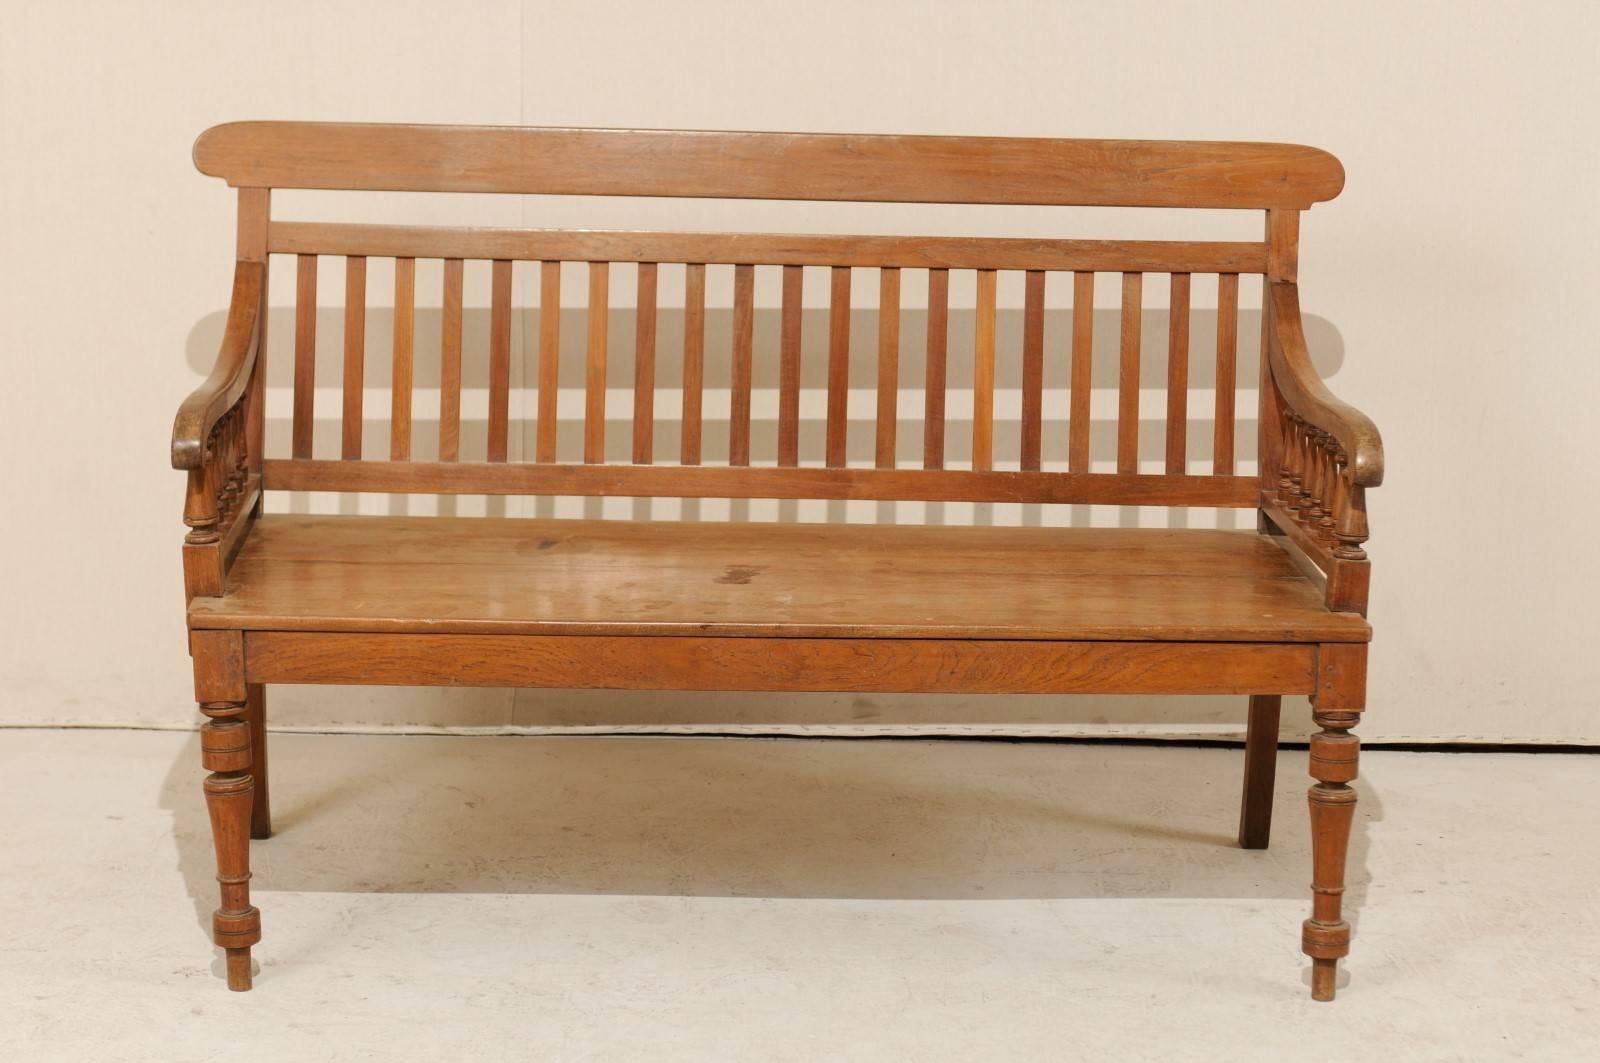 20th Century British Colonial Style Teak Wood Bench with Slats on the Backrest & Turned Legs